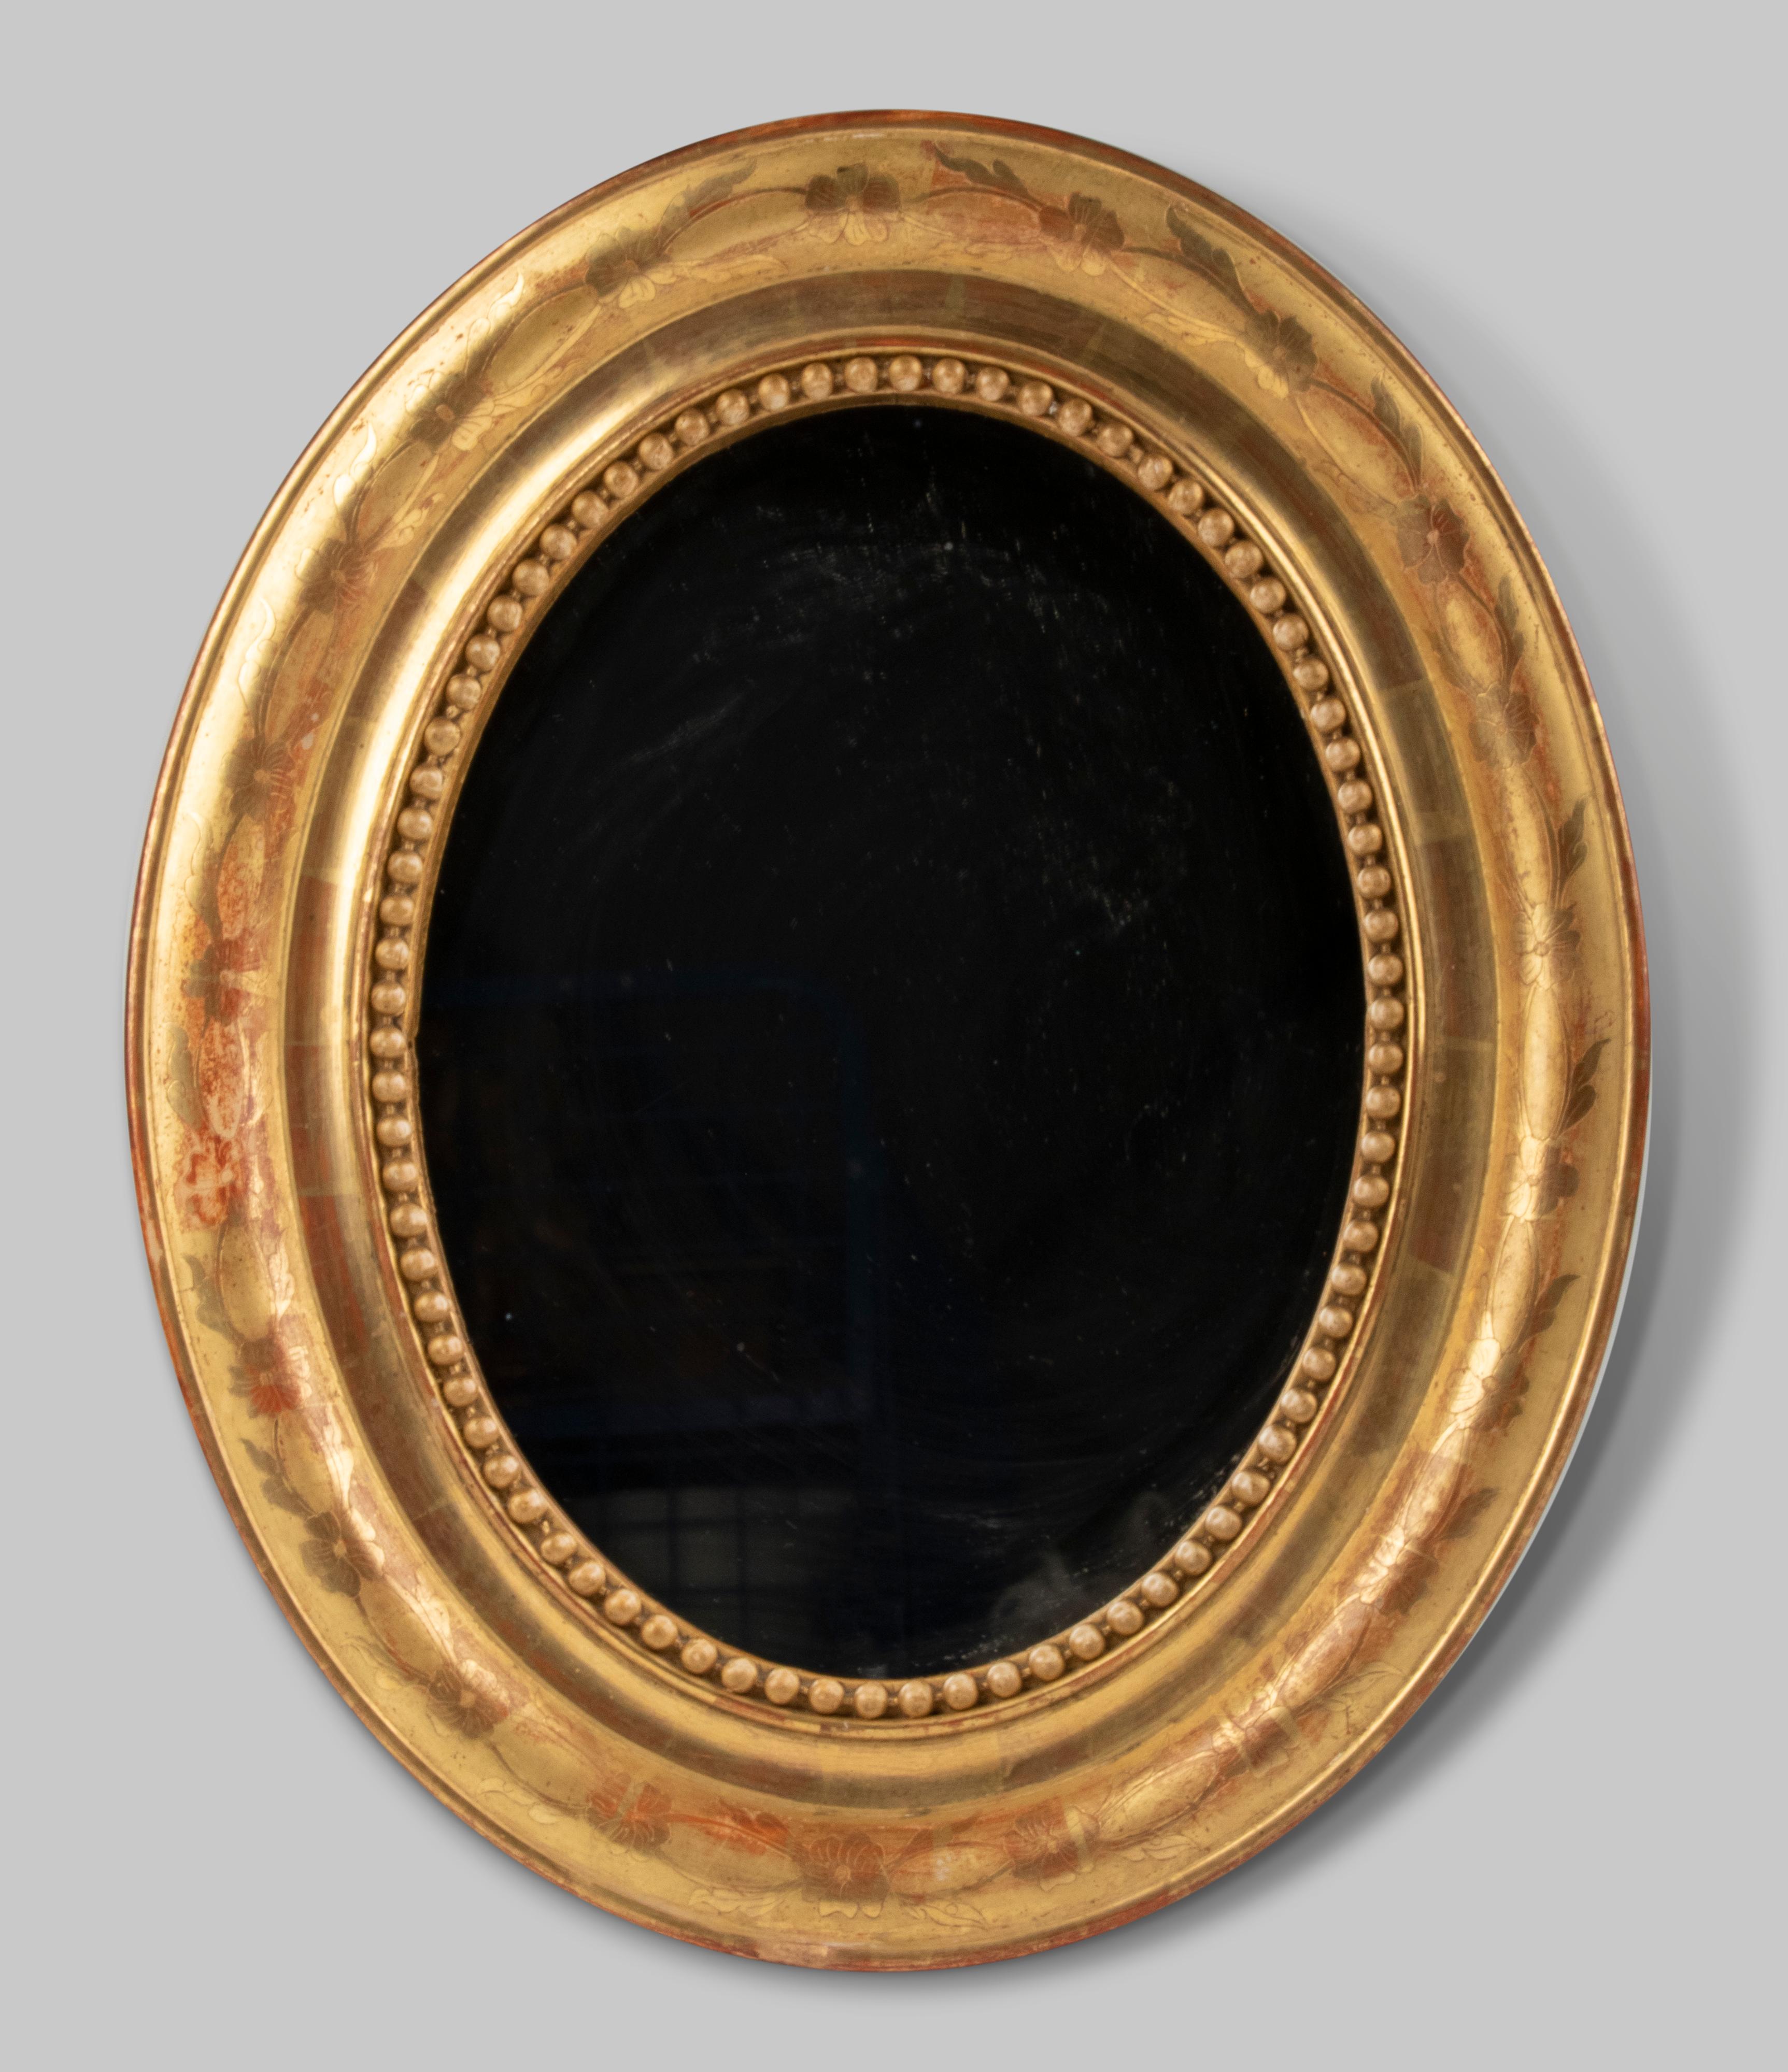 Beautiful antique French oval mirror in Louis Philippe style. It is a small size mirror. The frame is made of wood and plaster and decorated with an etched pattern of flowers. The frame is gilded in red.
This mirror dates from circa 1870-1880 and